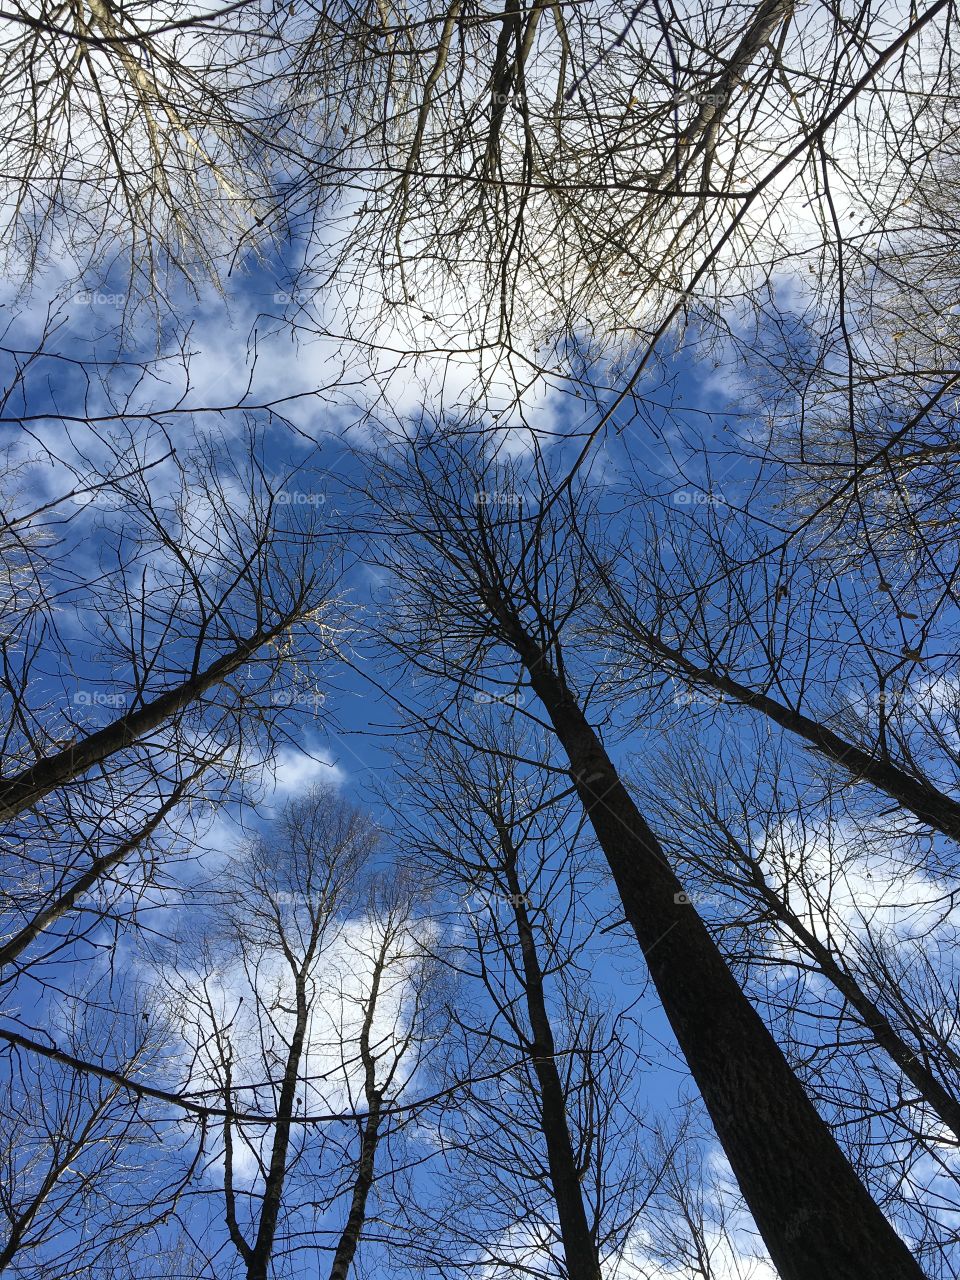 Looking up in the sky